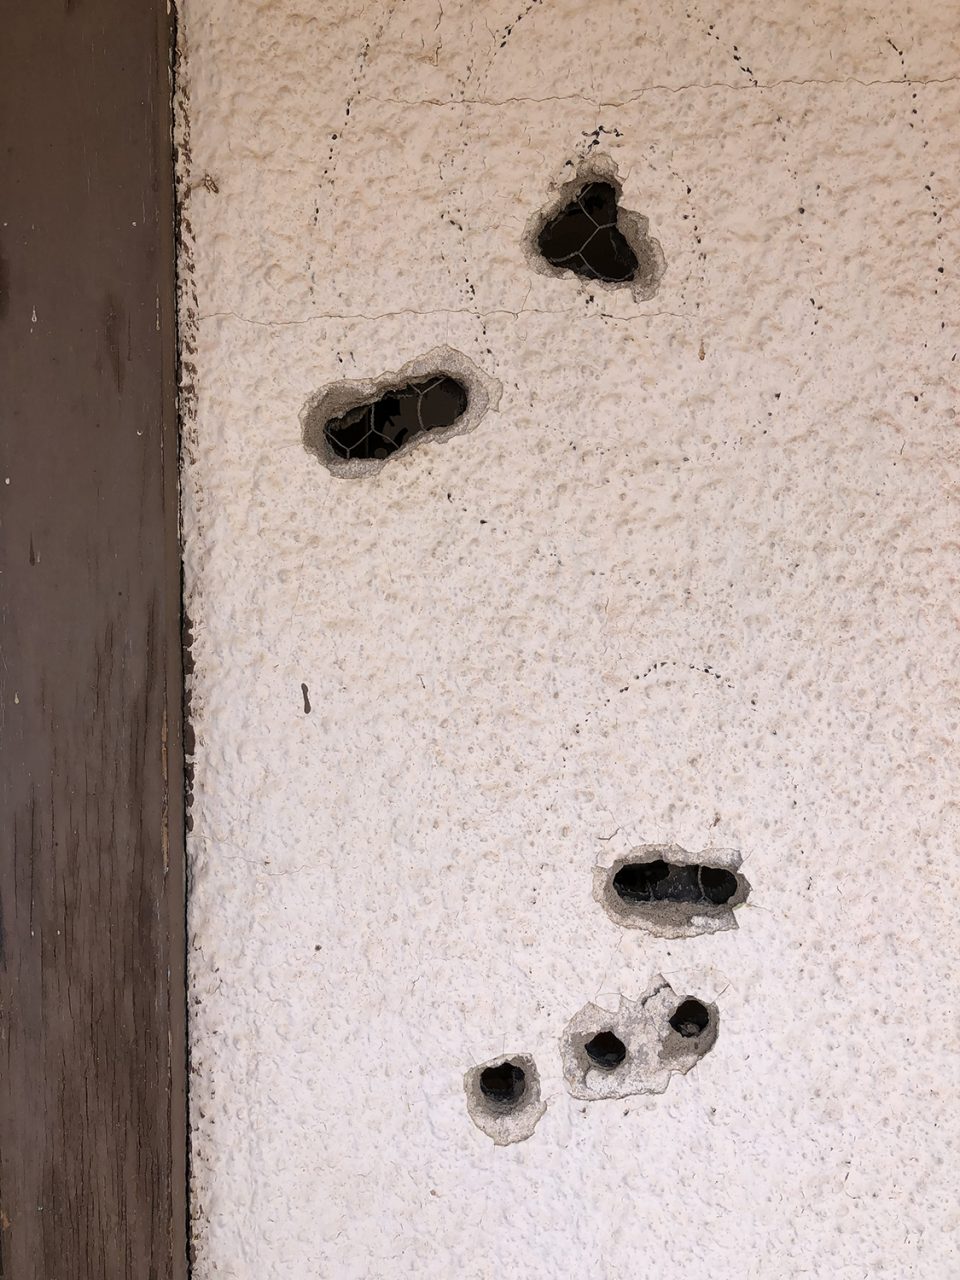 Bullet holes in the stucco walls of the Texas Longhorn Motel.